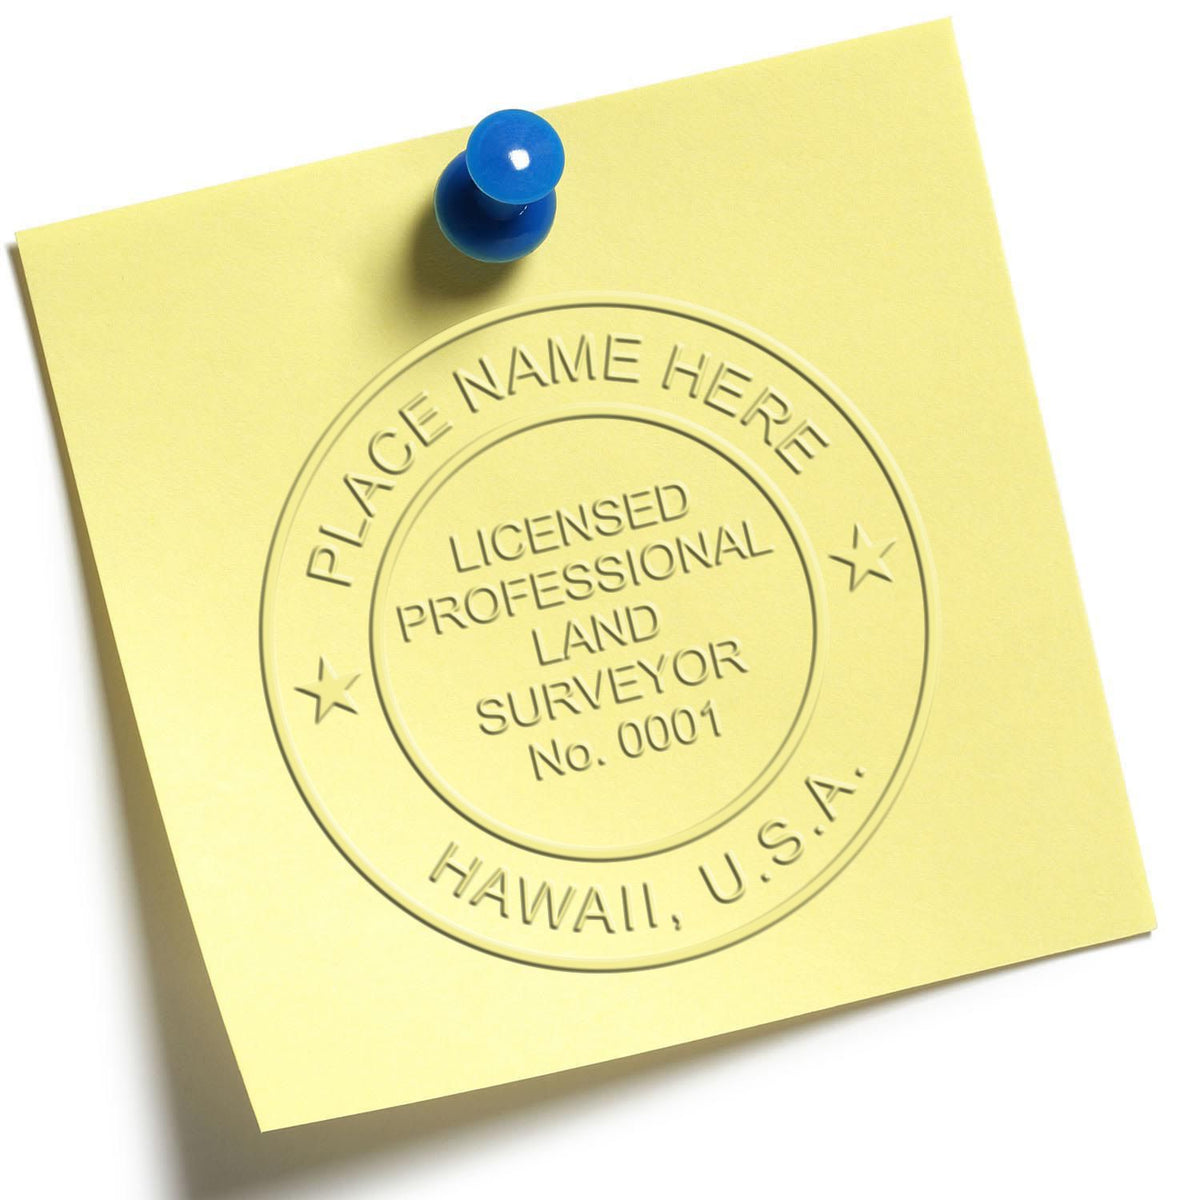 A photograph of the Hawaii Desk Surveyor Seal Embosser stamp impression reveals a vivid, professional image of the on paper.